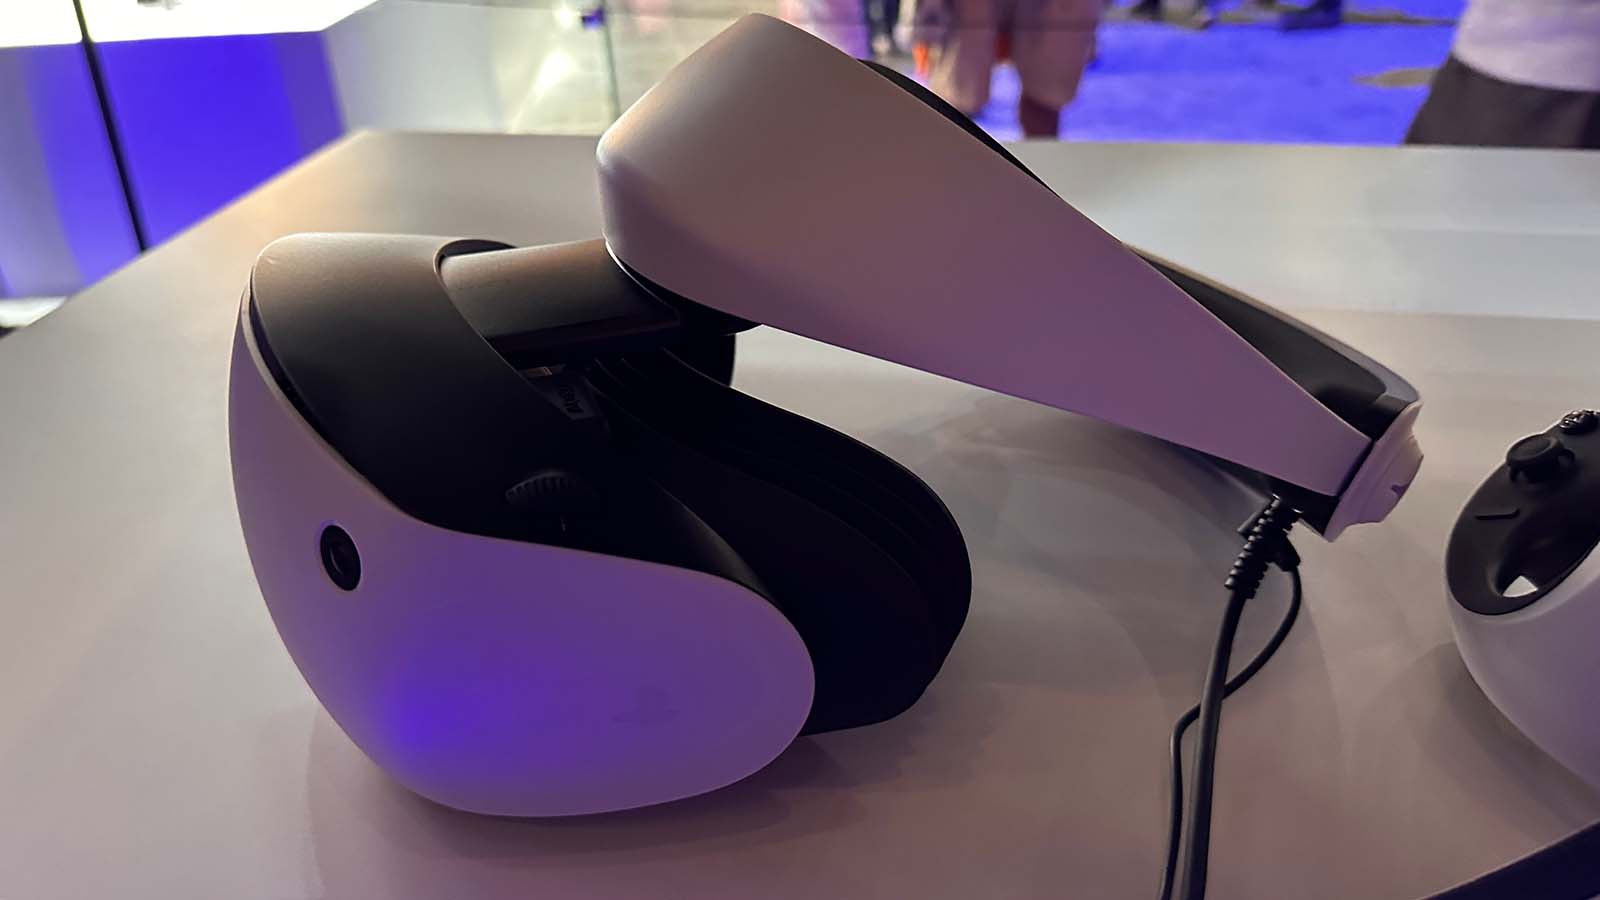 Sony's PlayStation VR2 headset has over 30 games launching in its first  month - The Verge